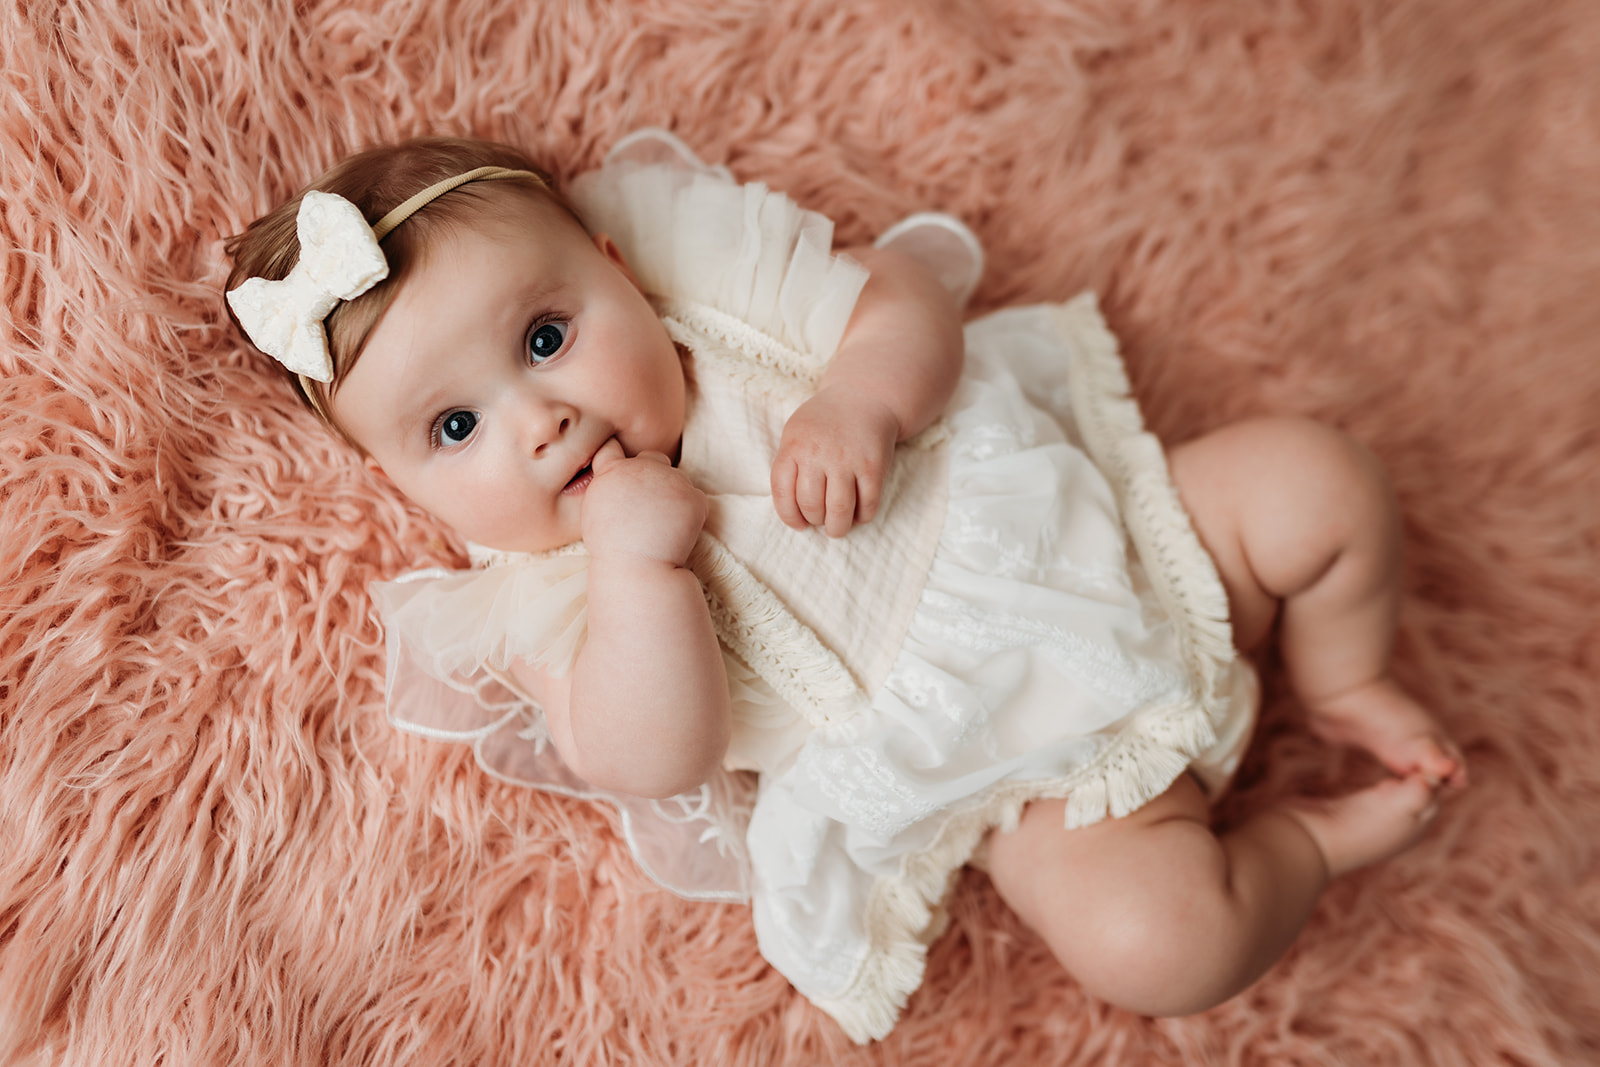 6 month old photo shoot to celebrate her milestone